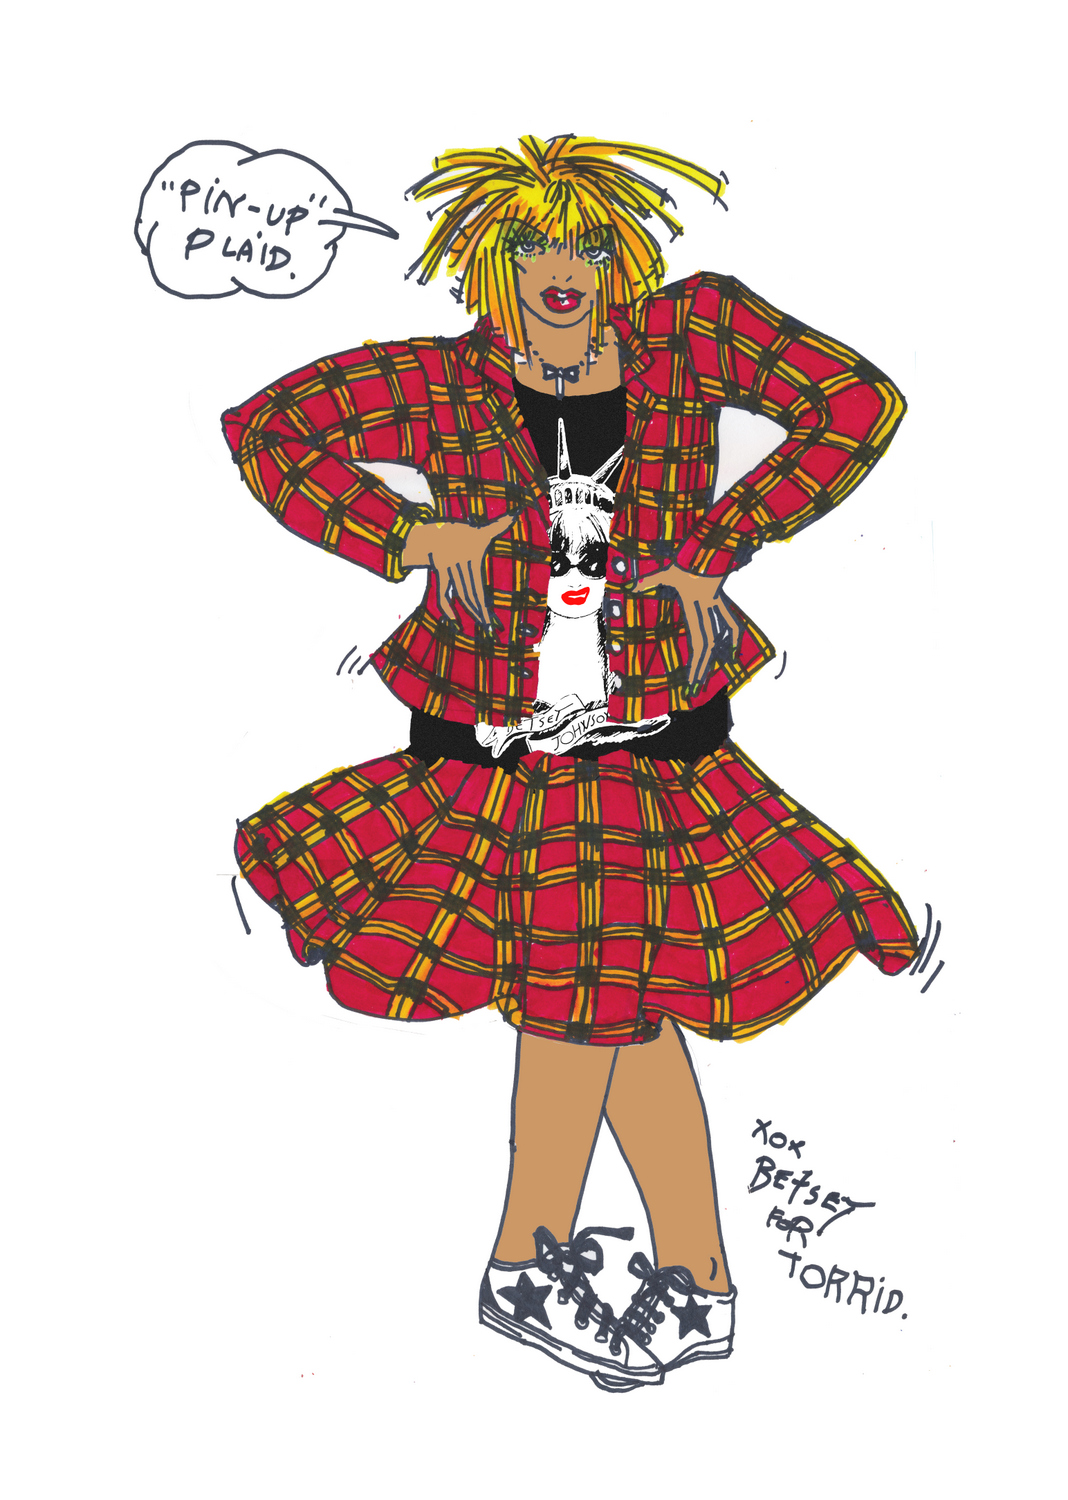 Torrid Meets Betsey Johnson Collection- Sketch